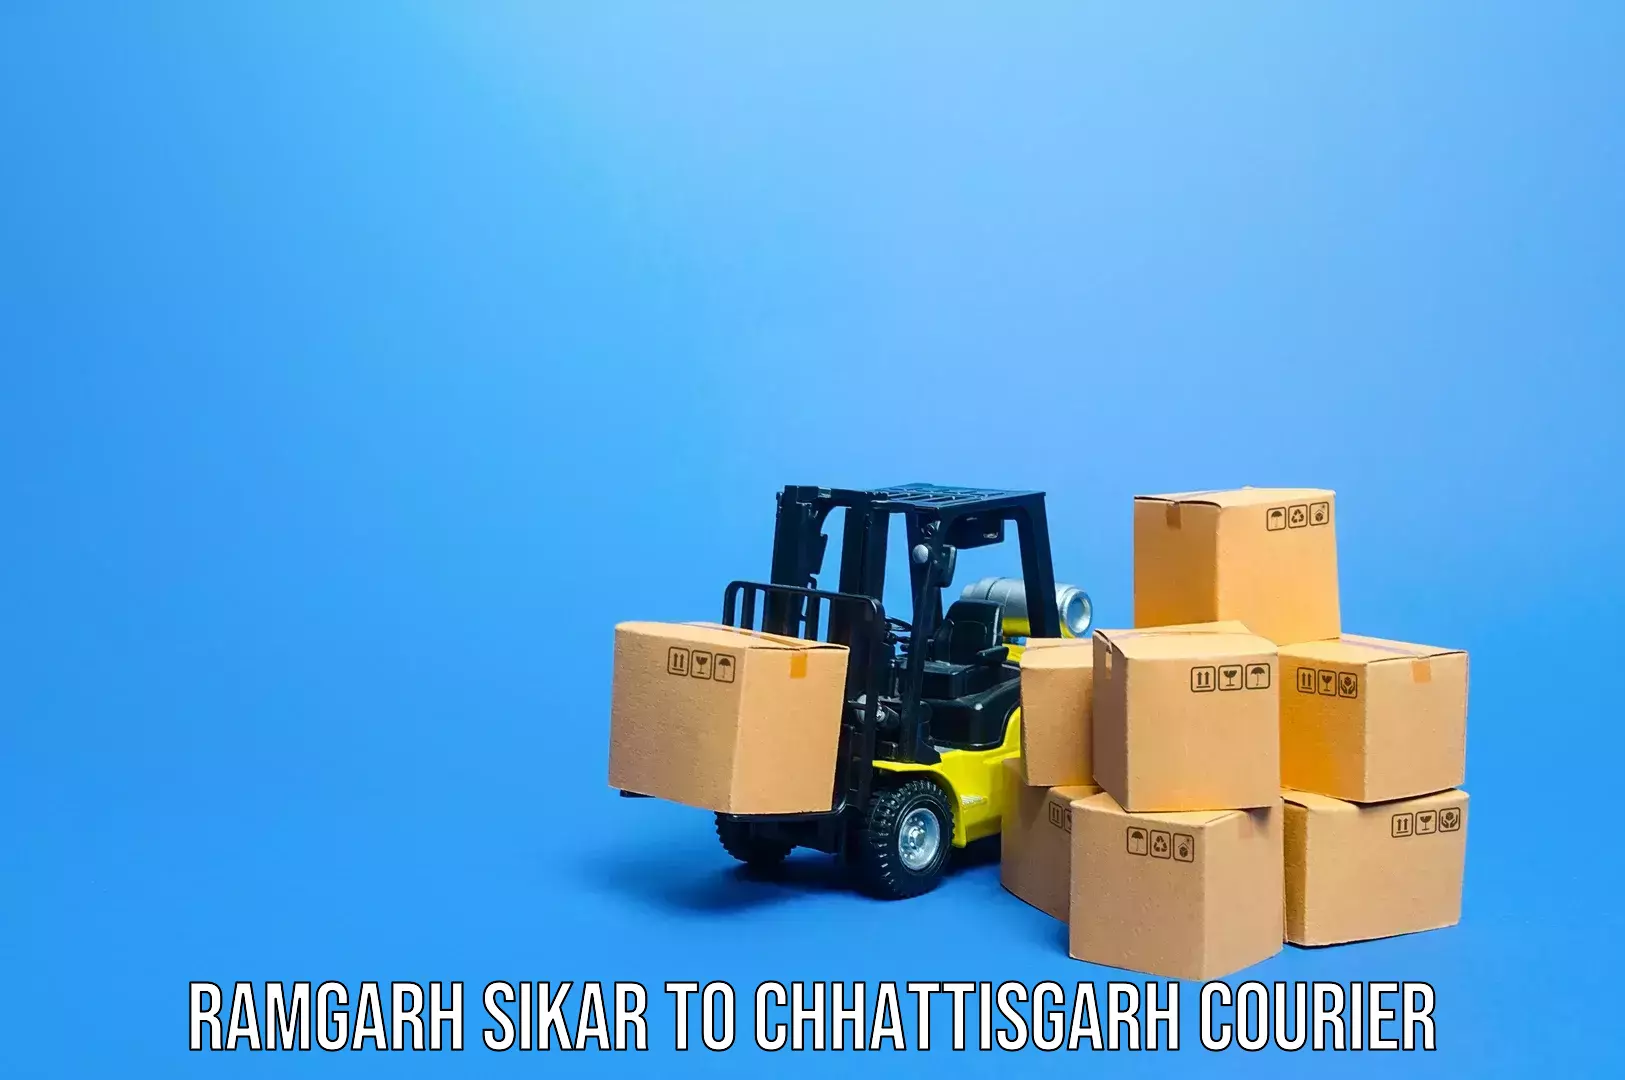 Baggage shipping service Ramgarh Sikar to Abhanpur